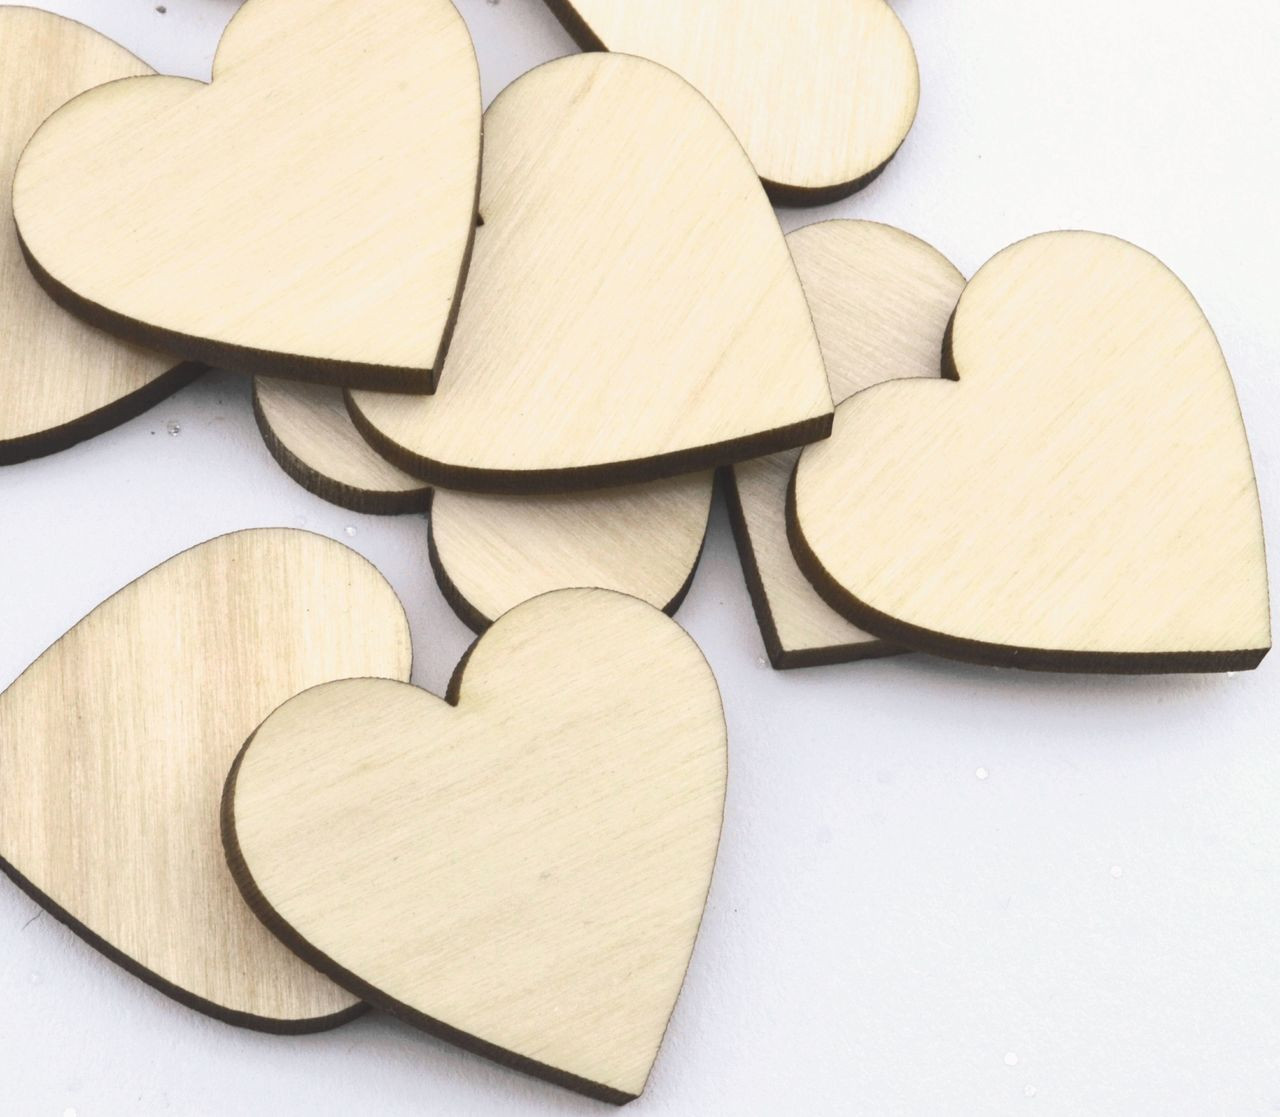 50 Laser cut wooden hearts - allthiswood